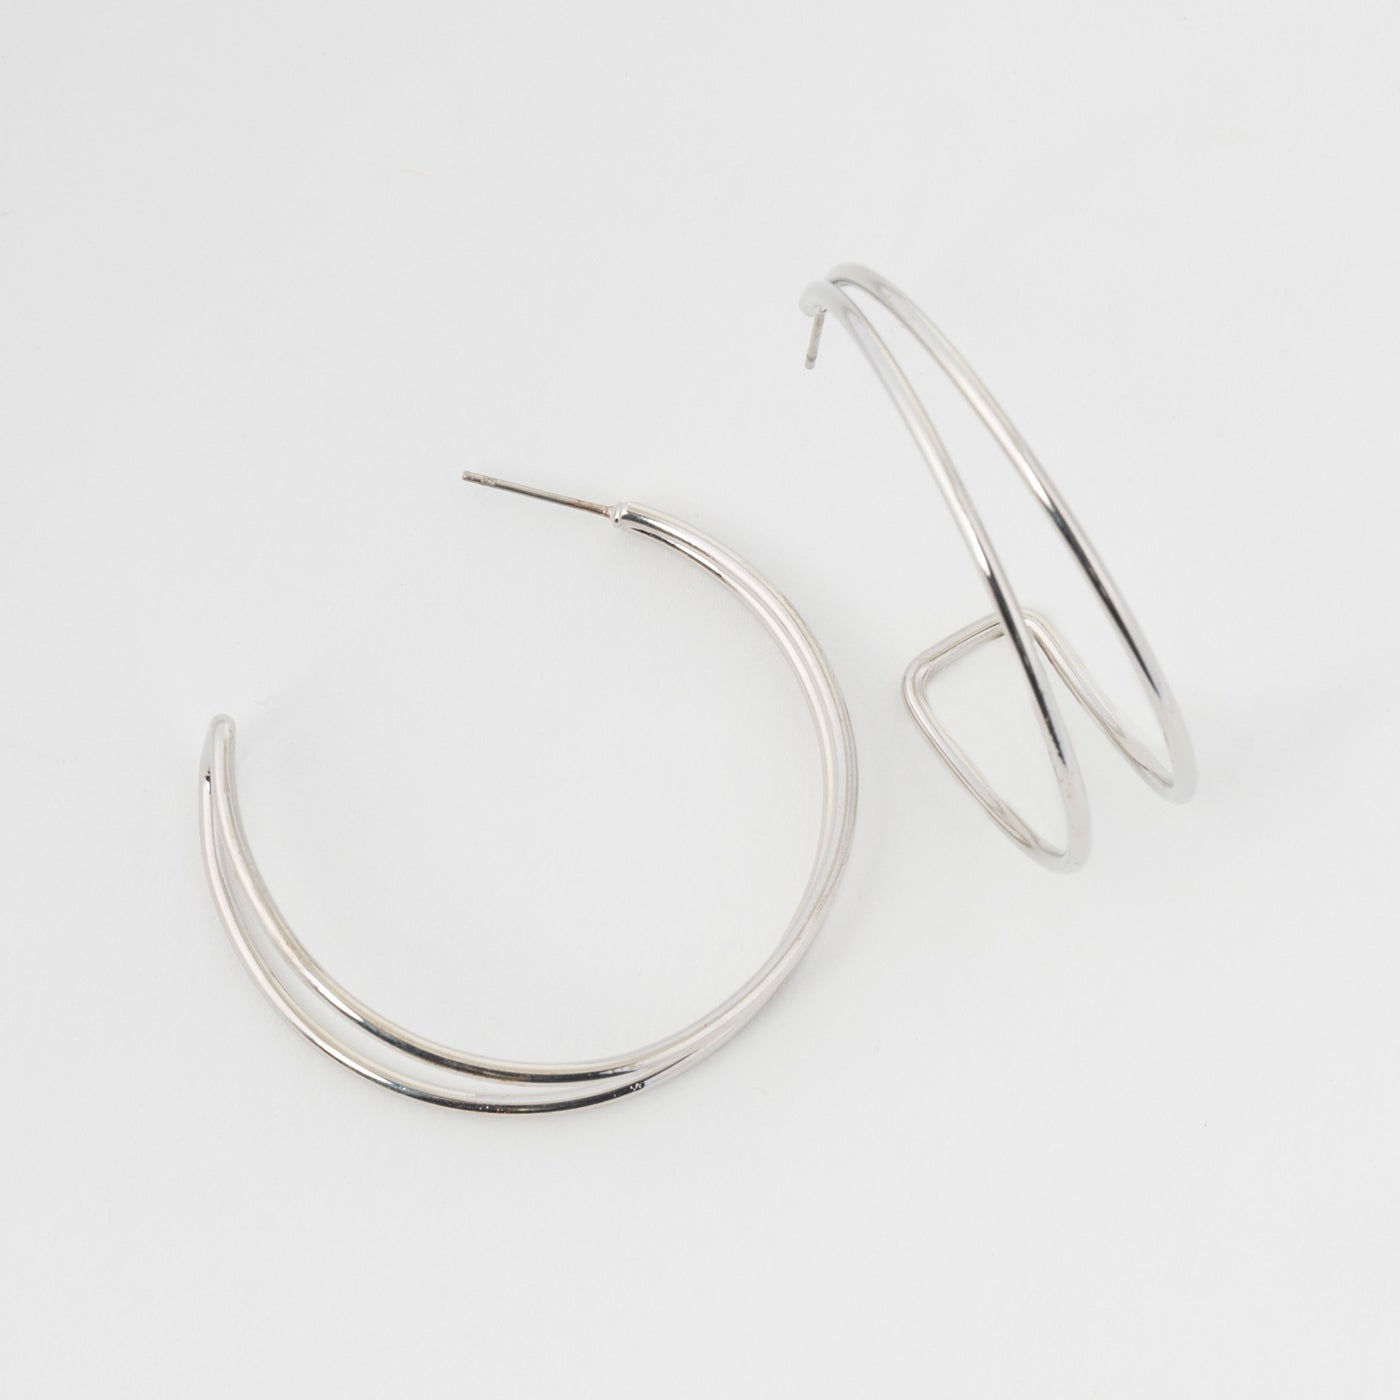 silver double hoops on a white background.